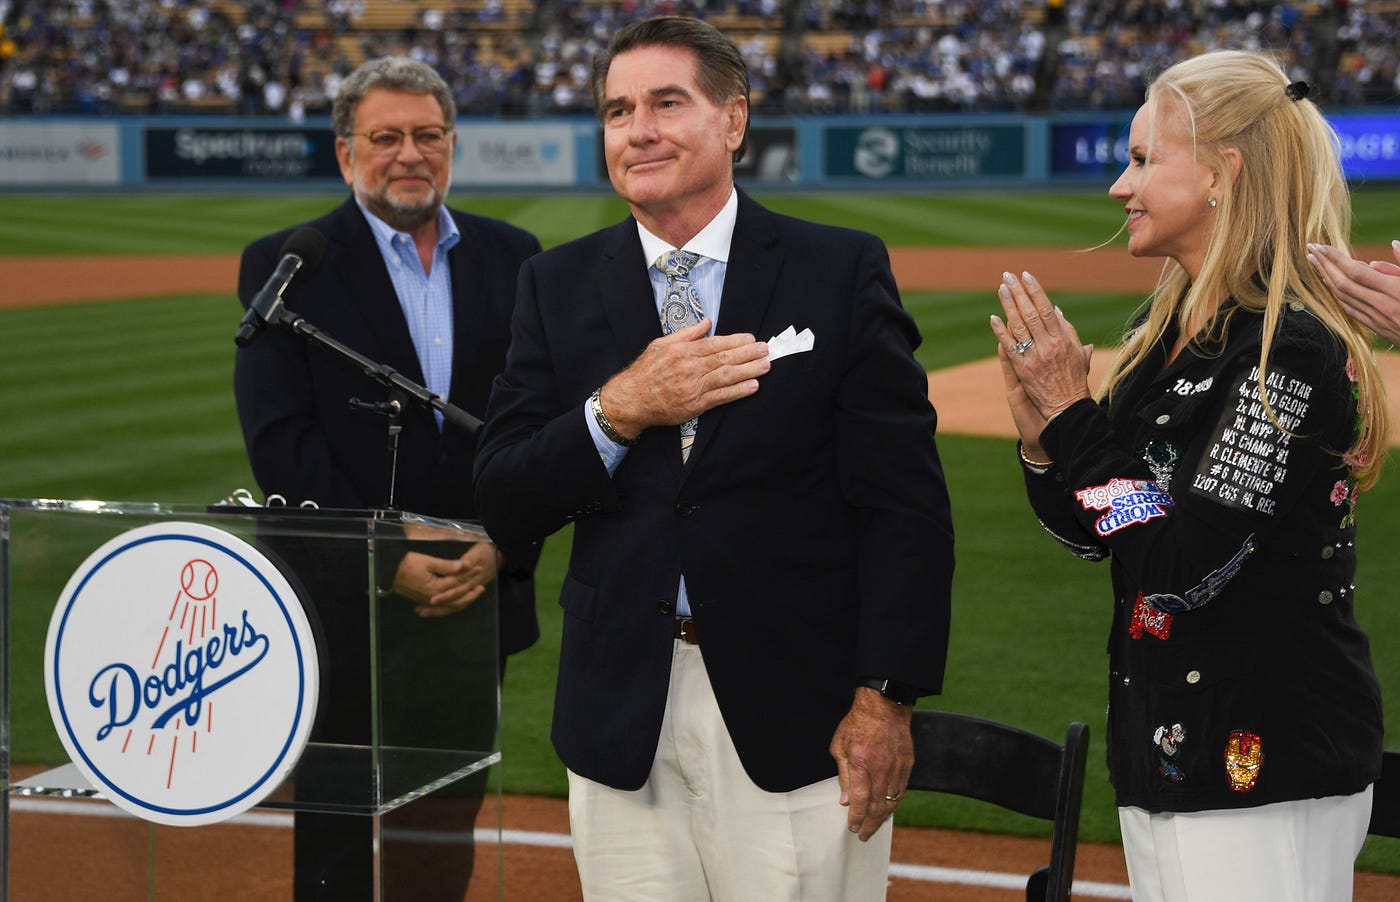 A special memory from Steve Garvey as he becomes legendary, by Cary  Osborne